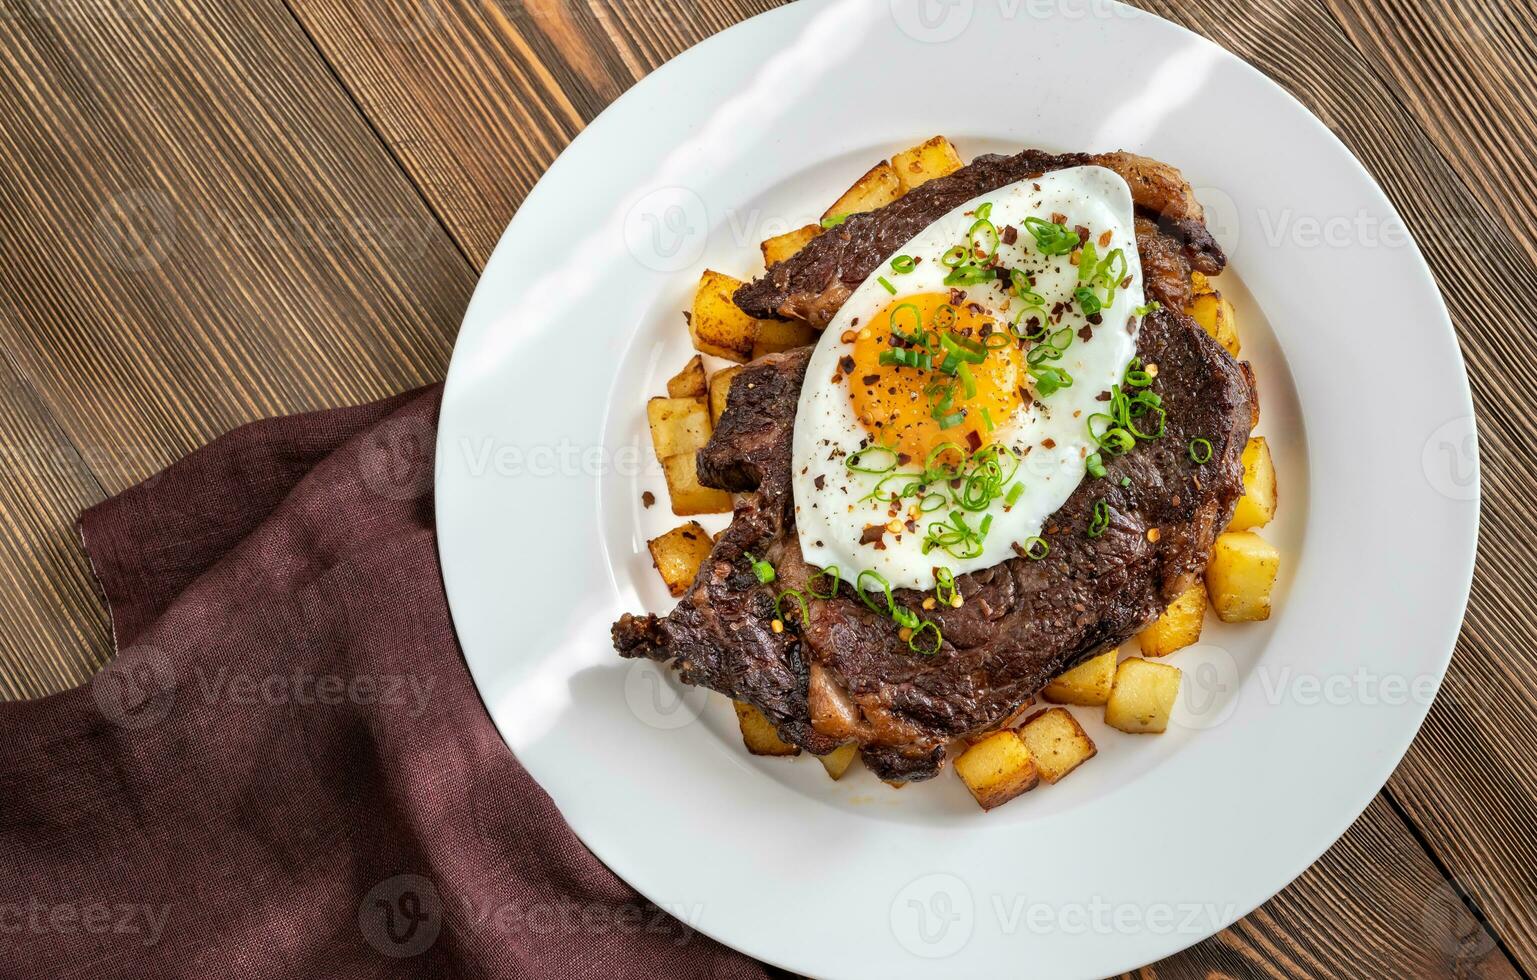 Beefsteak with fried egg photo